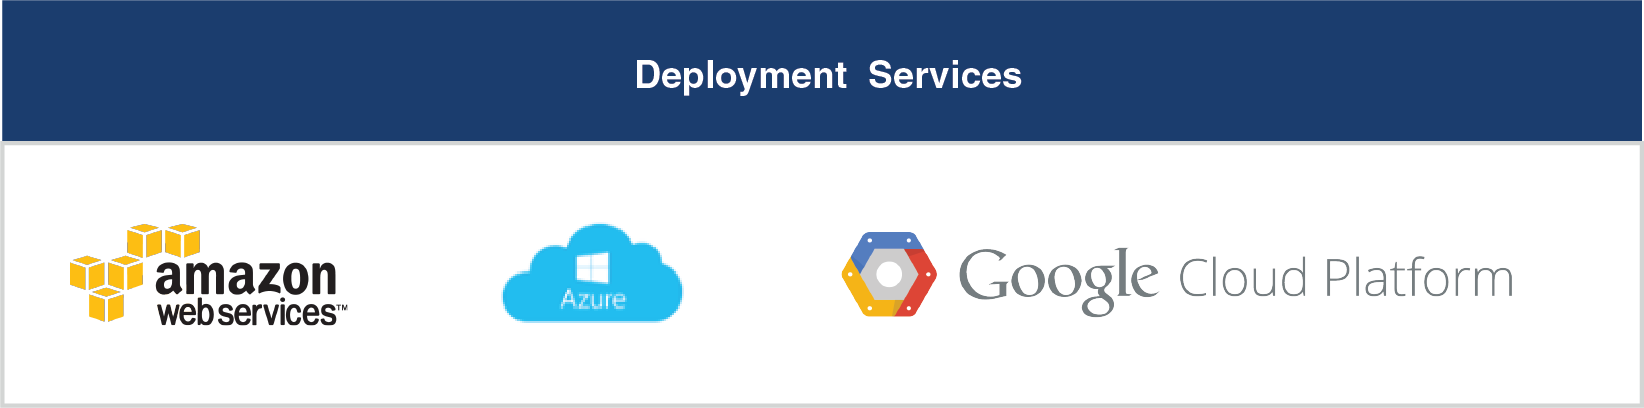 deployment-services-for-mobile-app